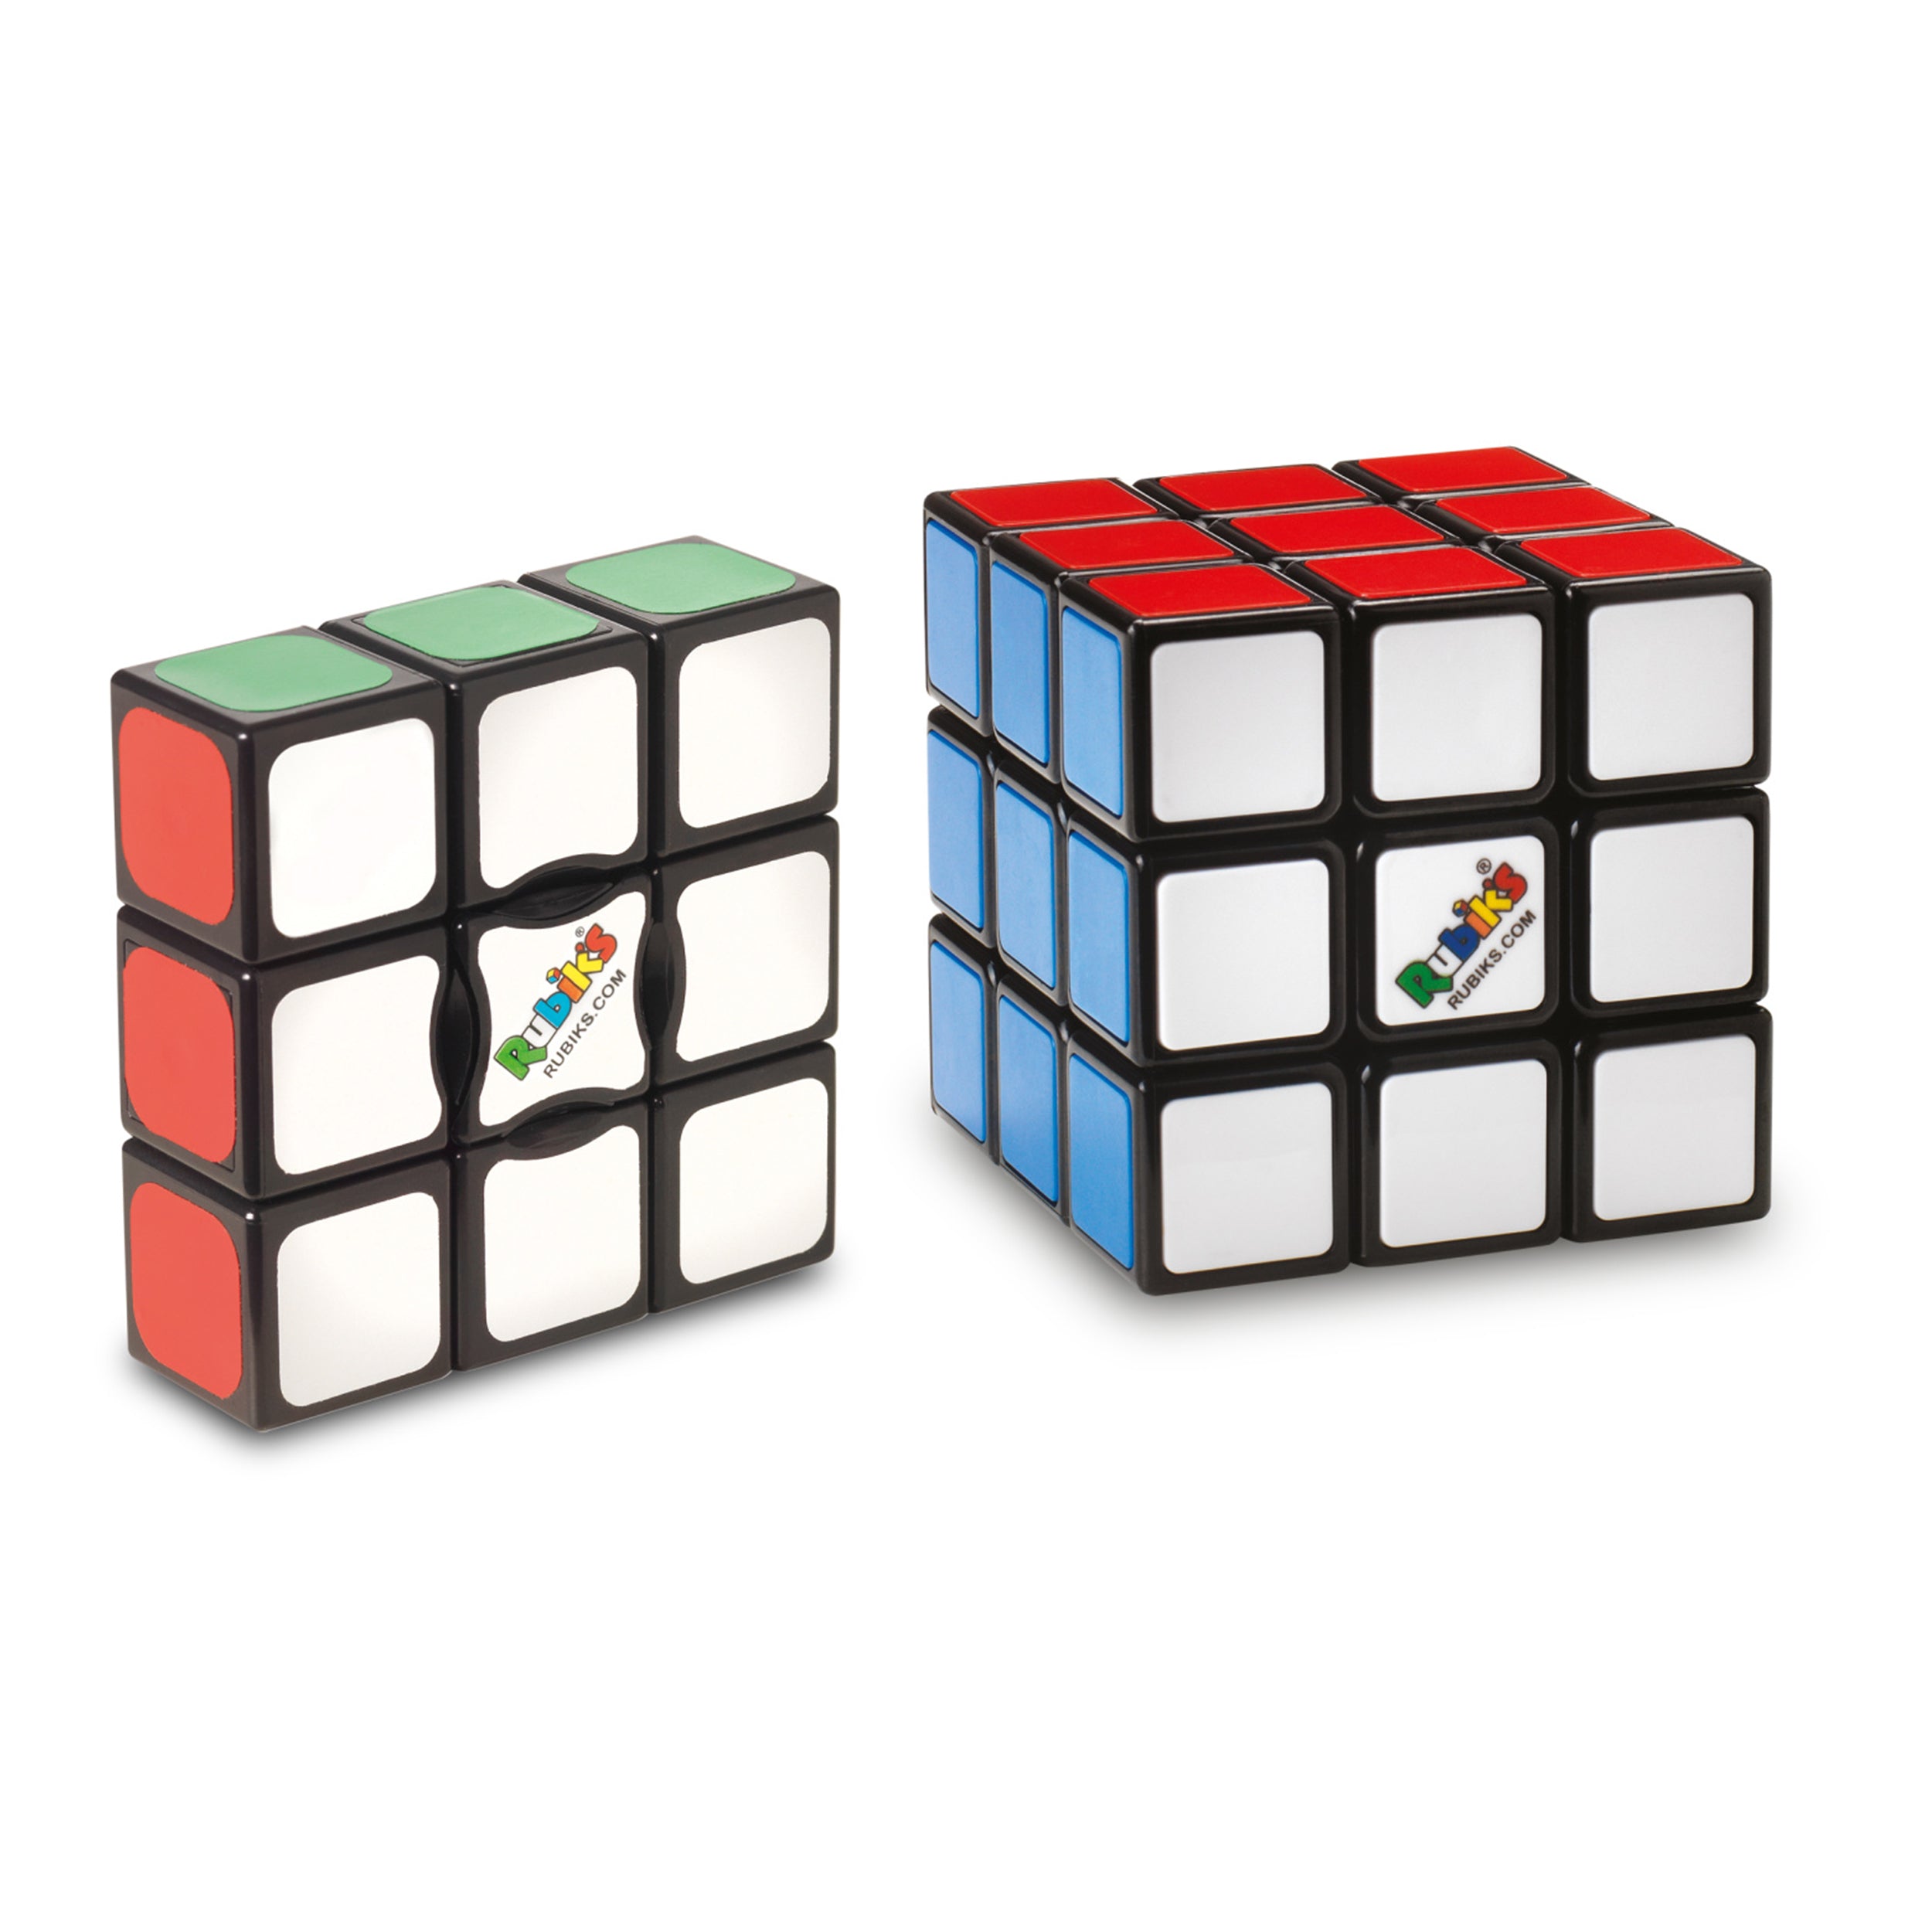 Rubik's Cube, The Starter Pack, The Original 3x3 Cube and Edge